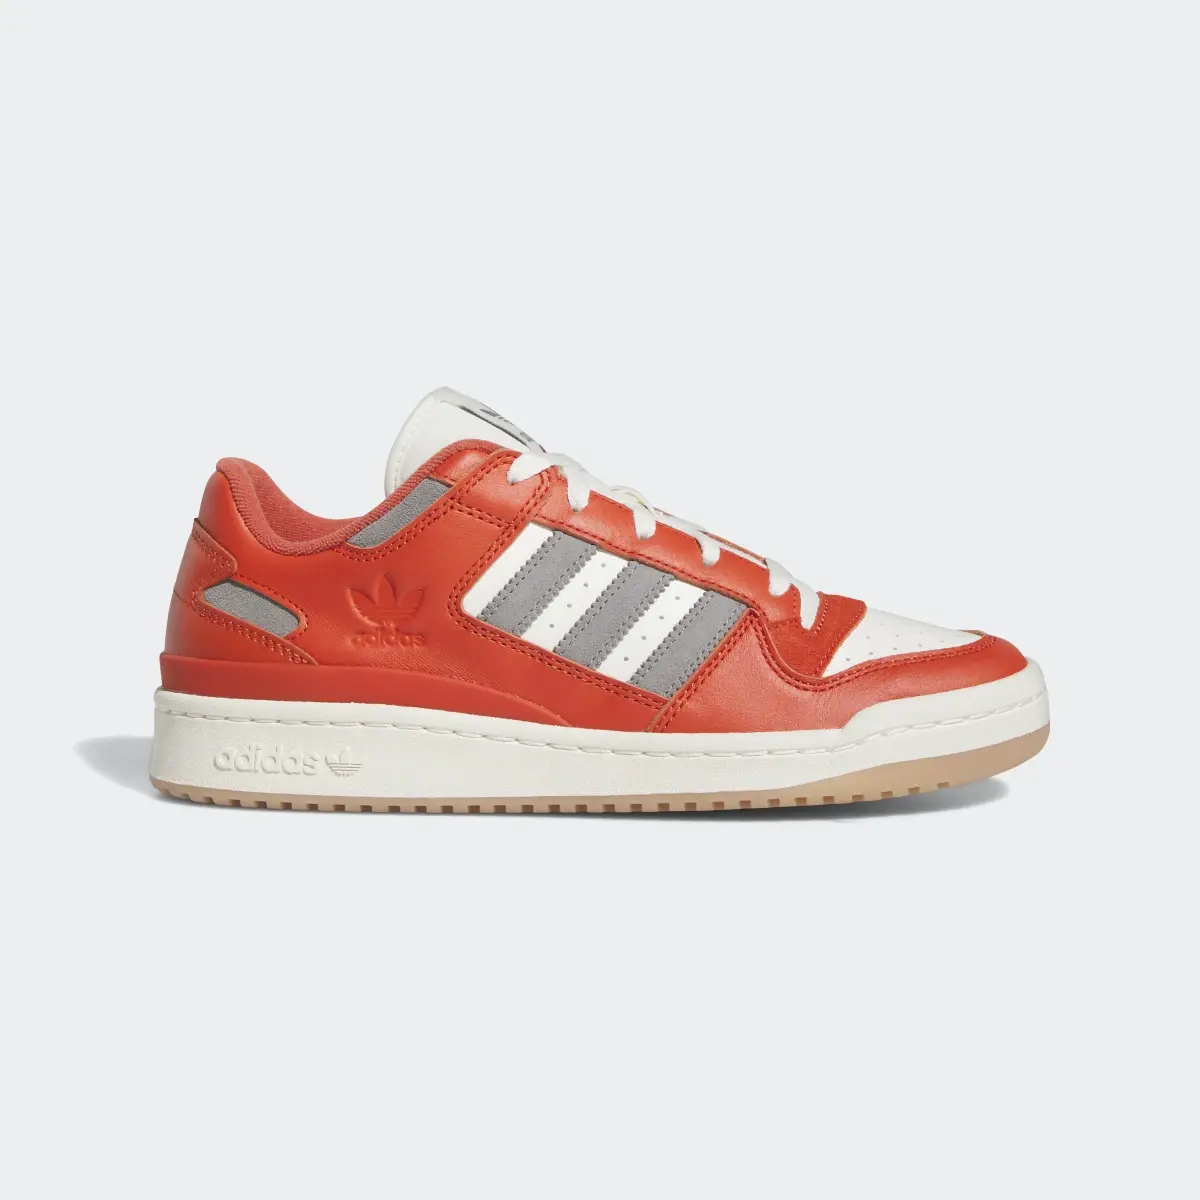 Adidas Forum Low Classic Shoes. 2